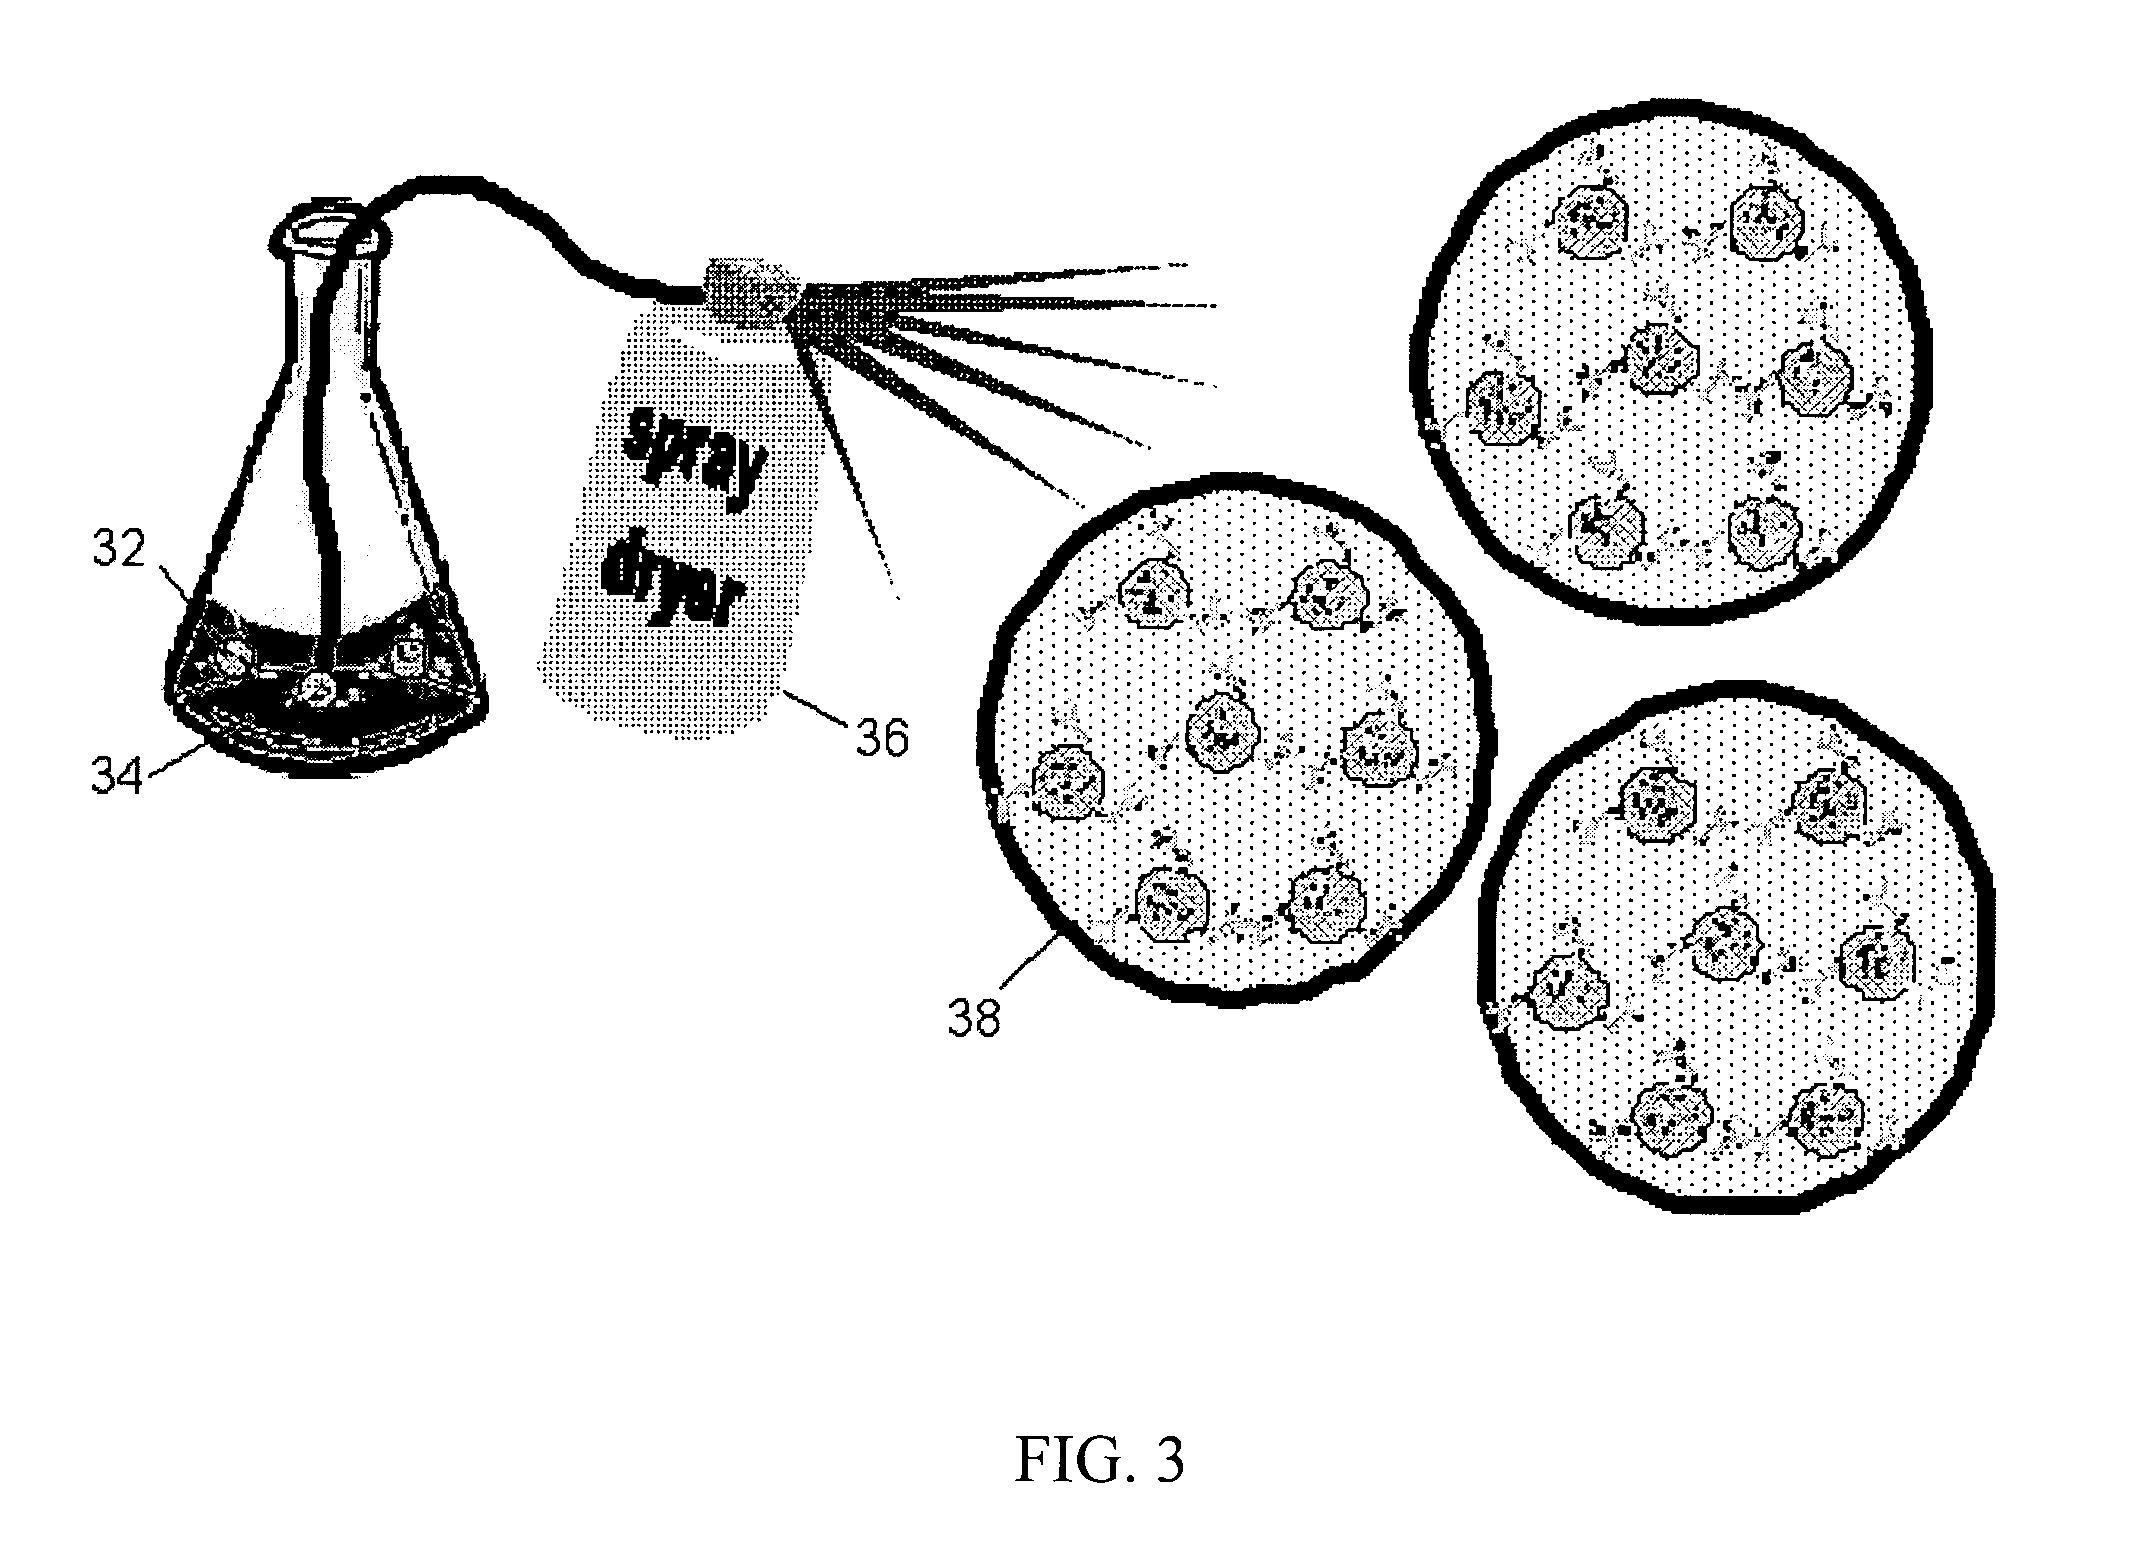 Formulation of powder containing nanoparticles for aerosol delivery to the lungs